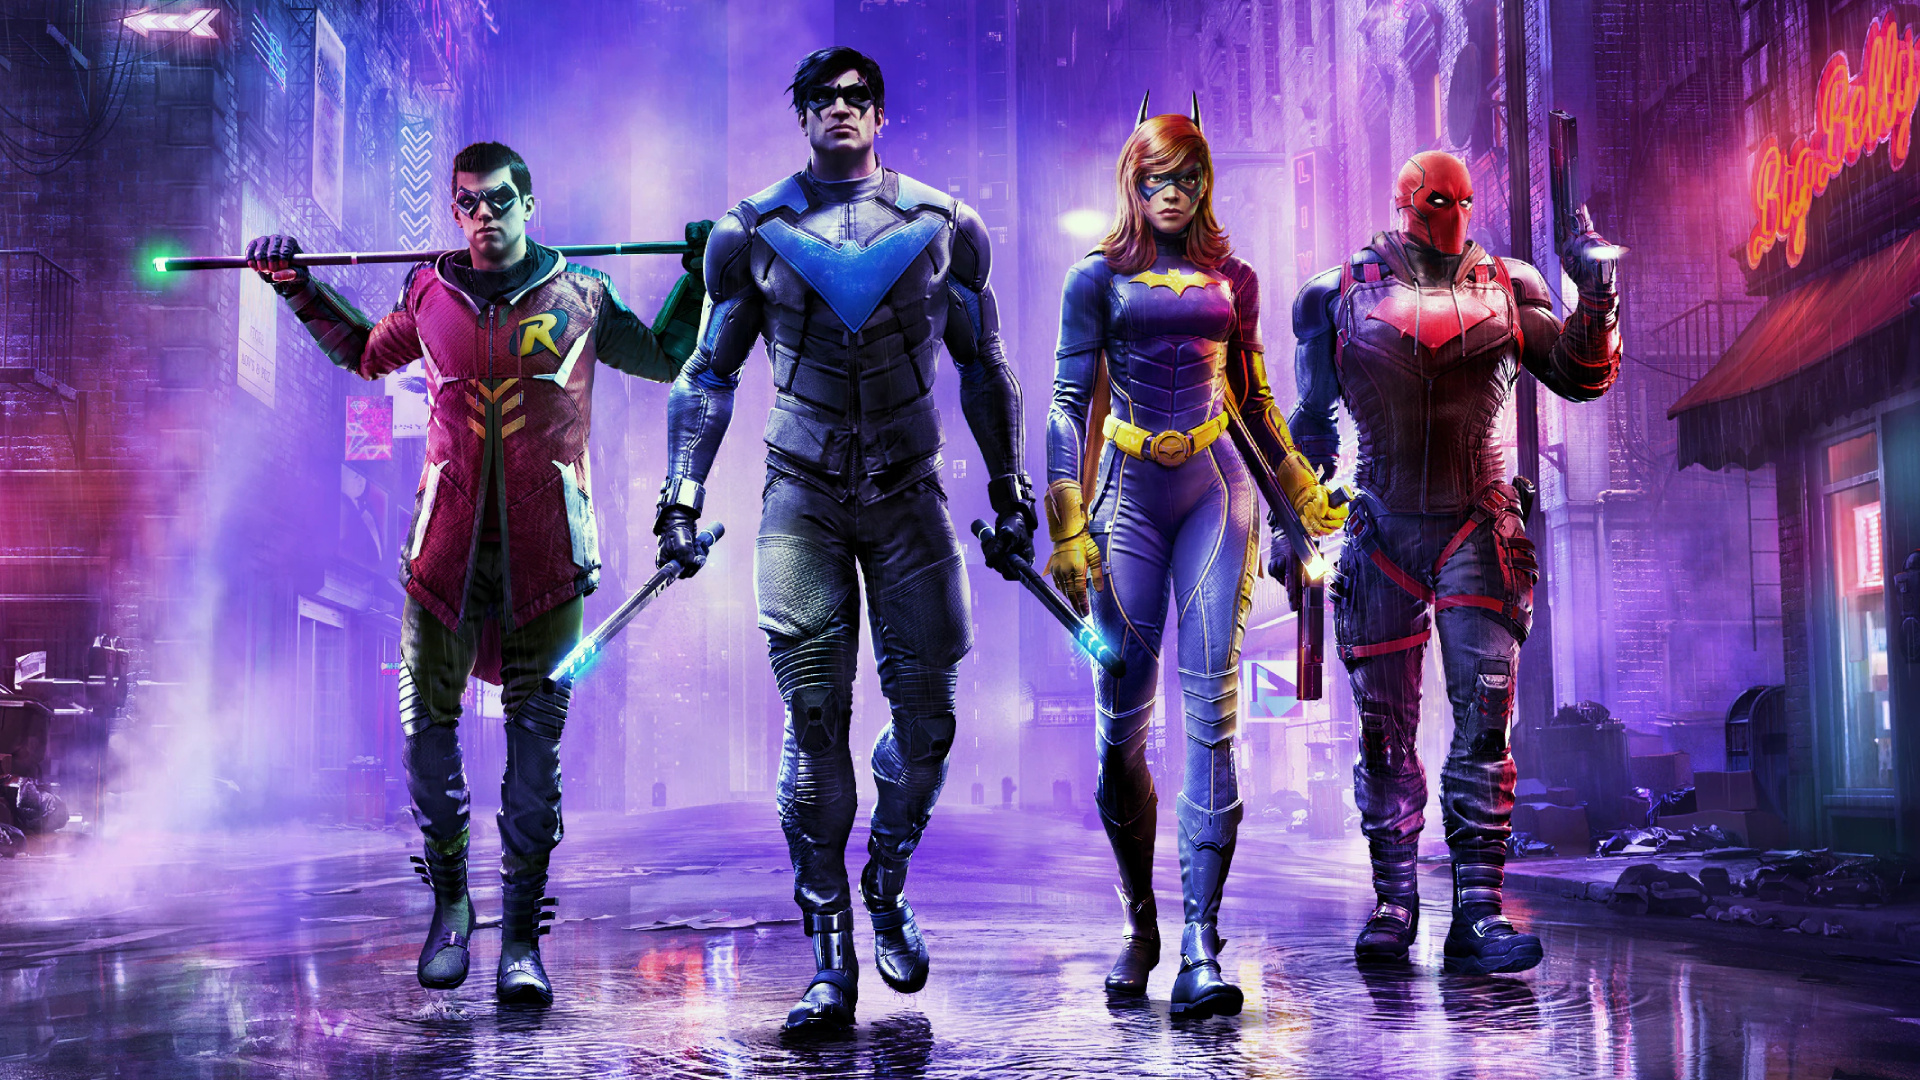 Gotham Knights (Game): Four playable characters: Nightwing, Batgirl, Robin, and Red Hood. 1920x1080 Full HD Background.